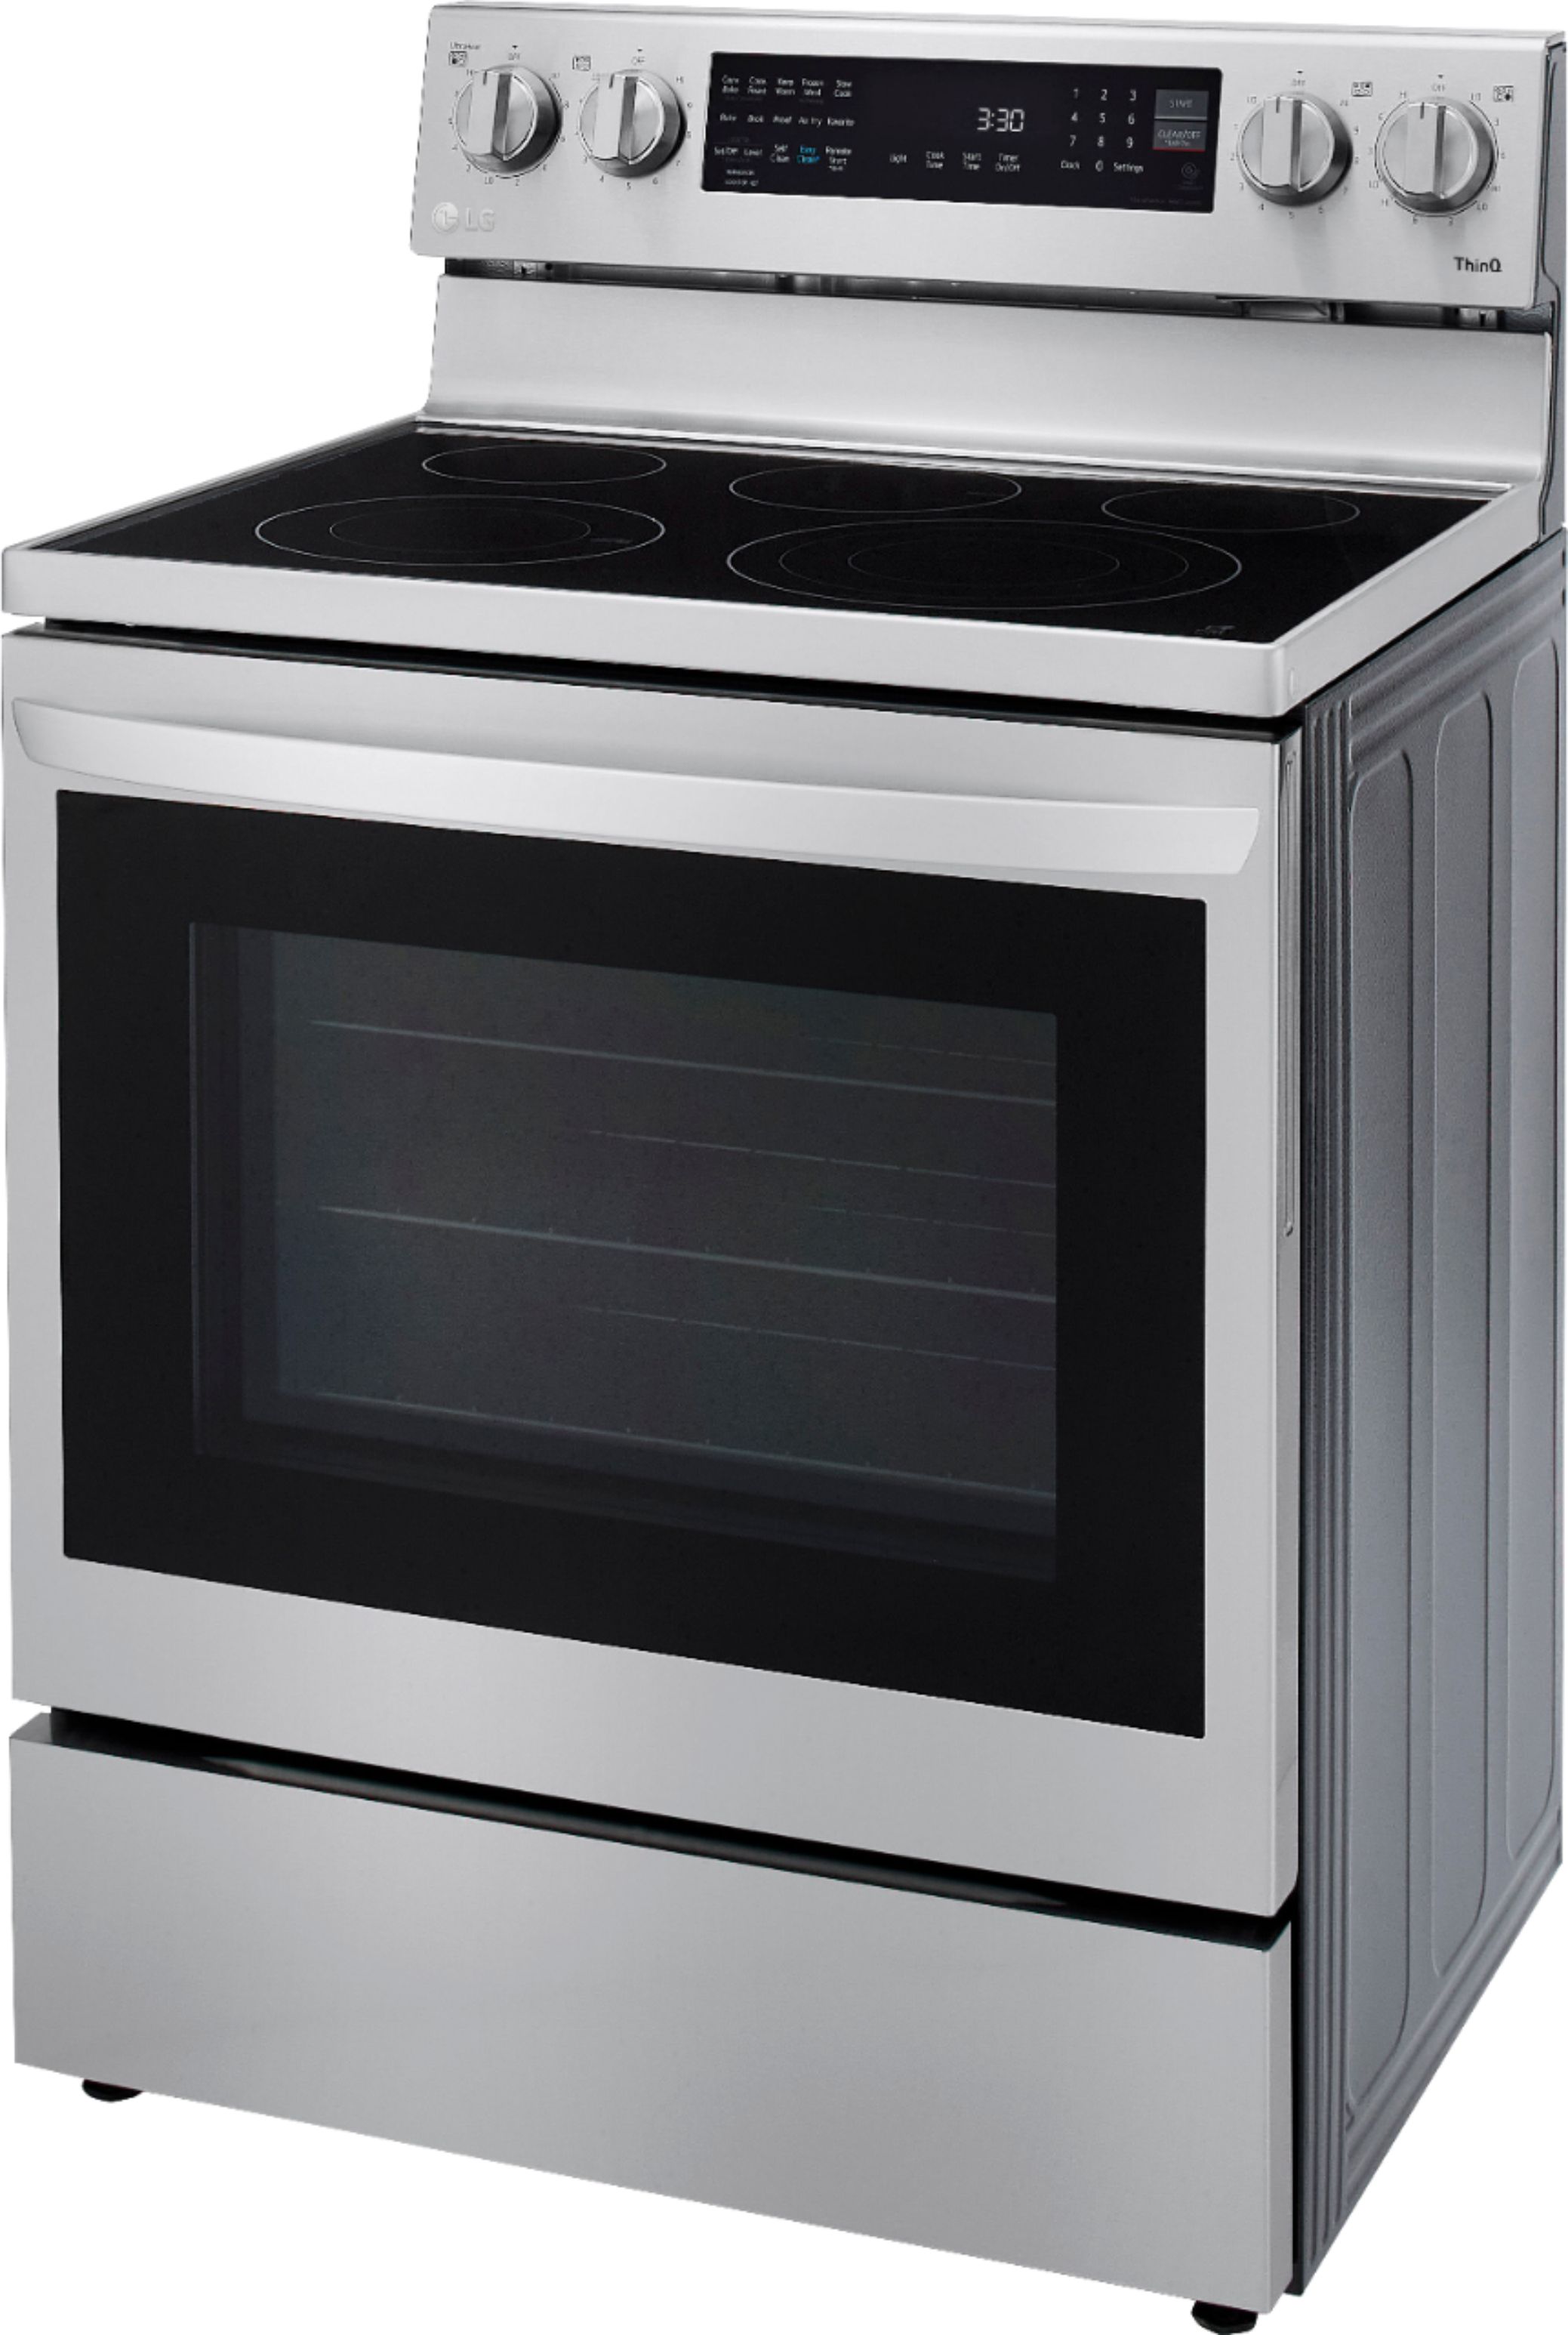 LG 6.3 Cu ft Electric Range with Instaview - Stainless Steel